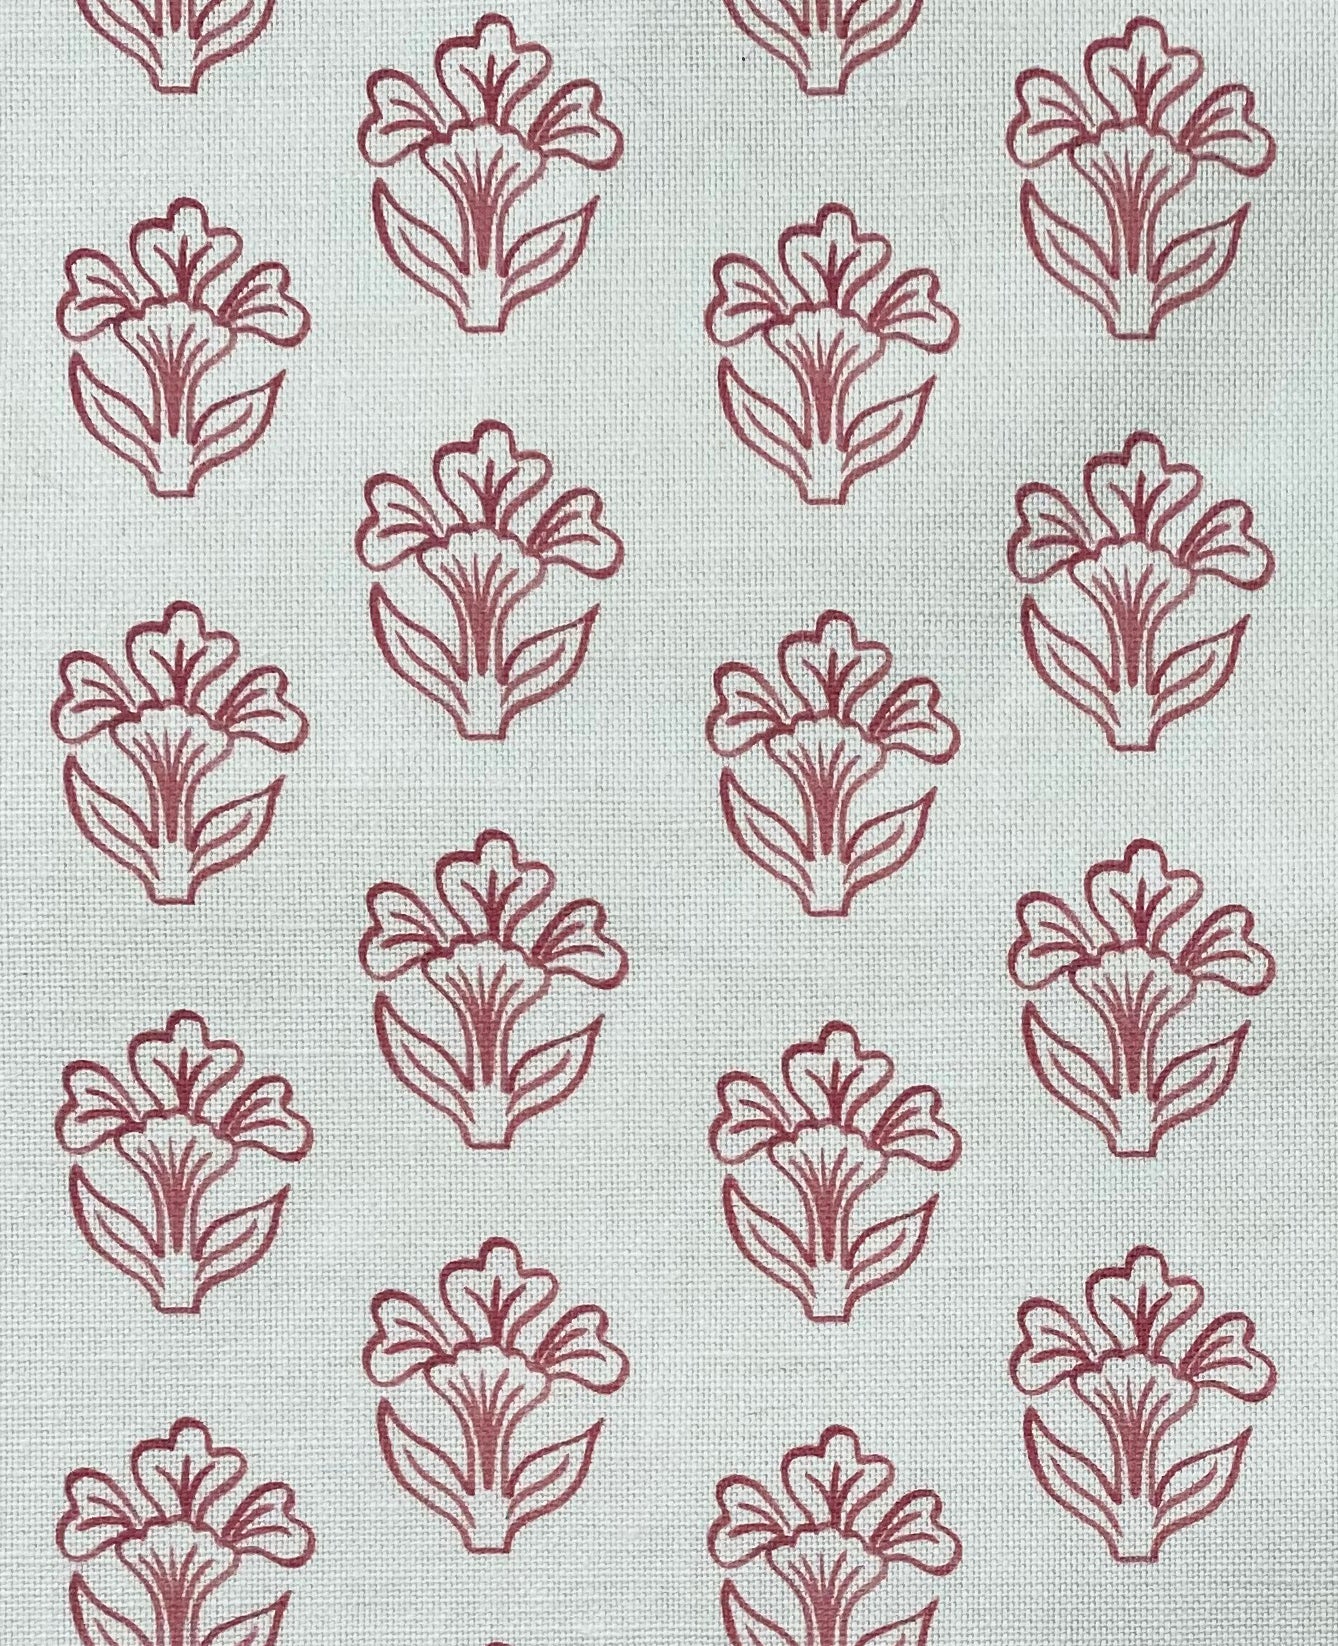 Inspired by block print, floral pink motif printed in England